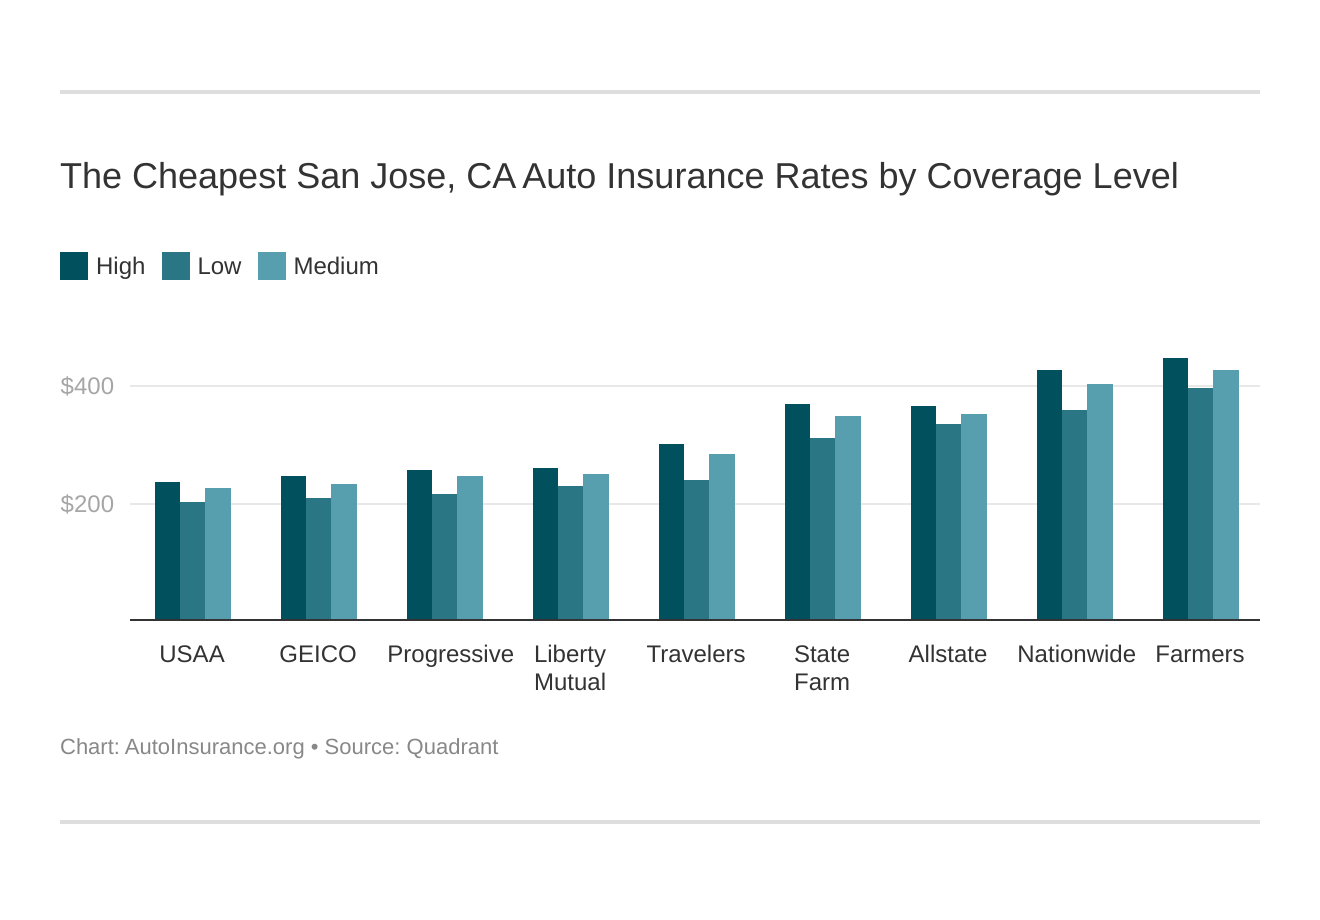 The Cheapest San Jose, CA Auto Insurance Rates by Coverage Level